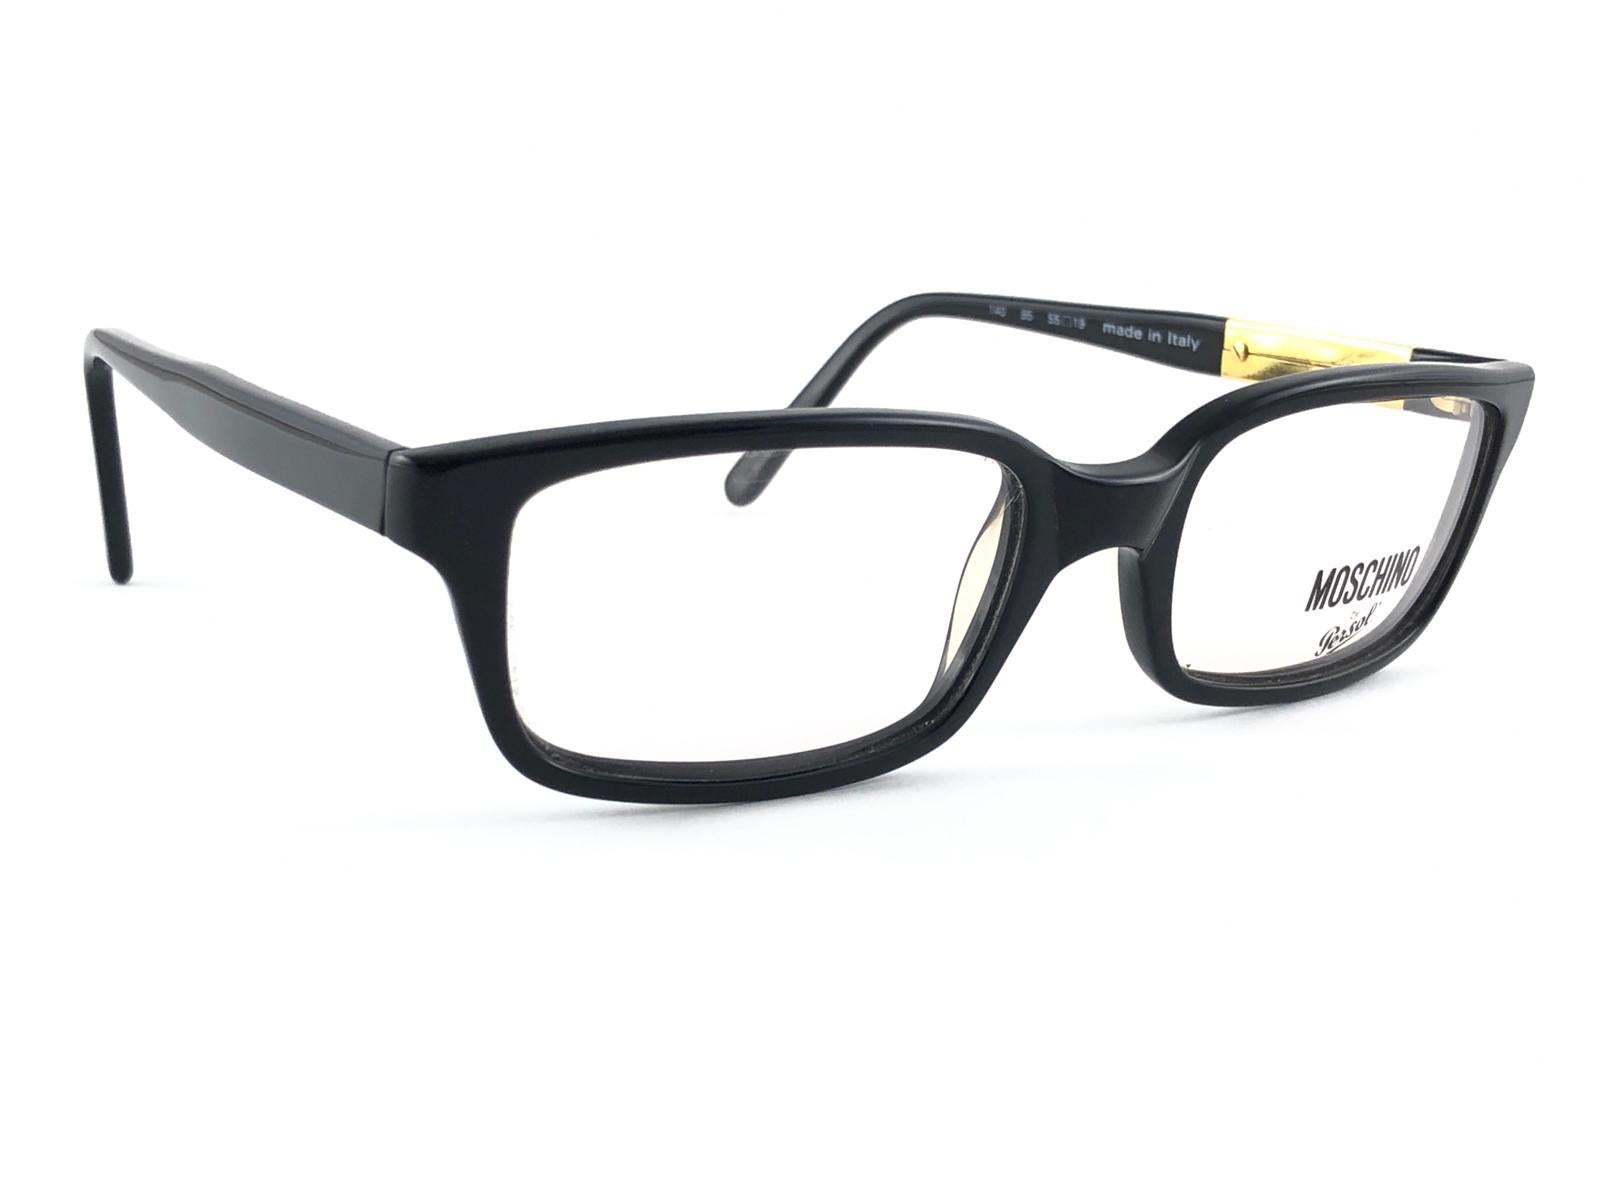 New Vintage Moschino small sleek black frame ready for your prescription lenses.

Made in Italy.
 
Produced and design in 1990's.

This item may show minor sign of wear due to storage.


FRONT : 13.5   CMS

LENS HEIGHT : 3.1 CMS

LENS WIDTH : 5